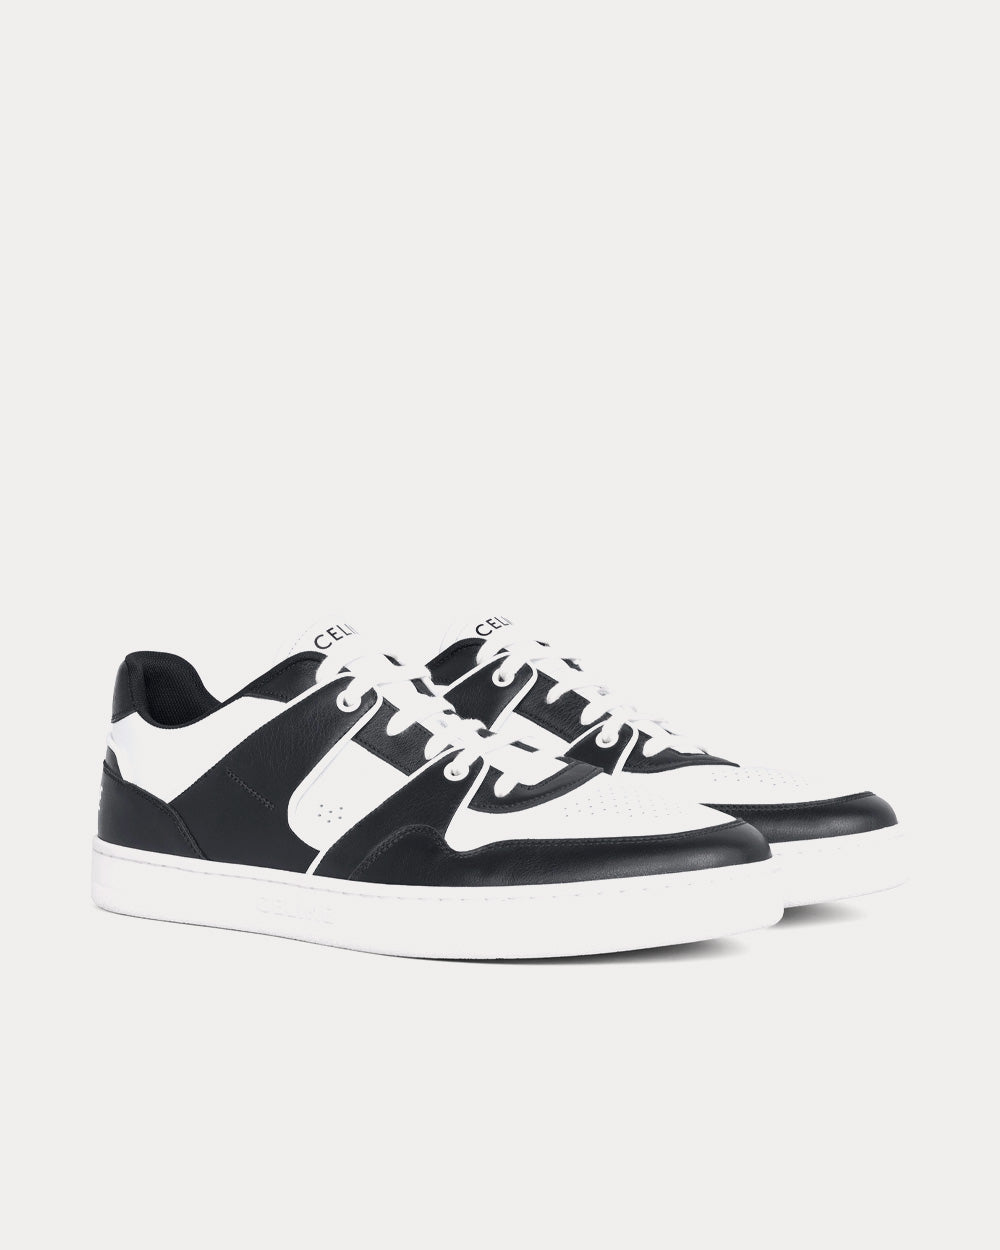 Celine - CT-04 Leather White / Black Low Top Sneakers